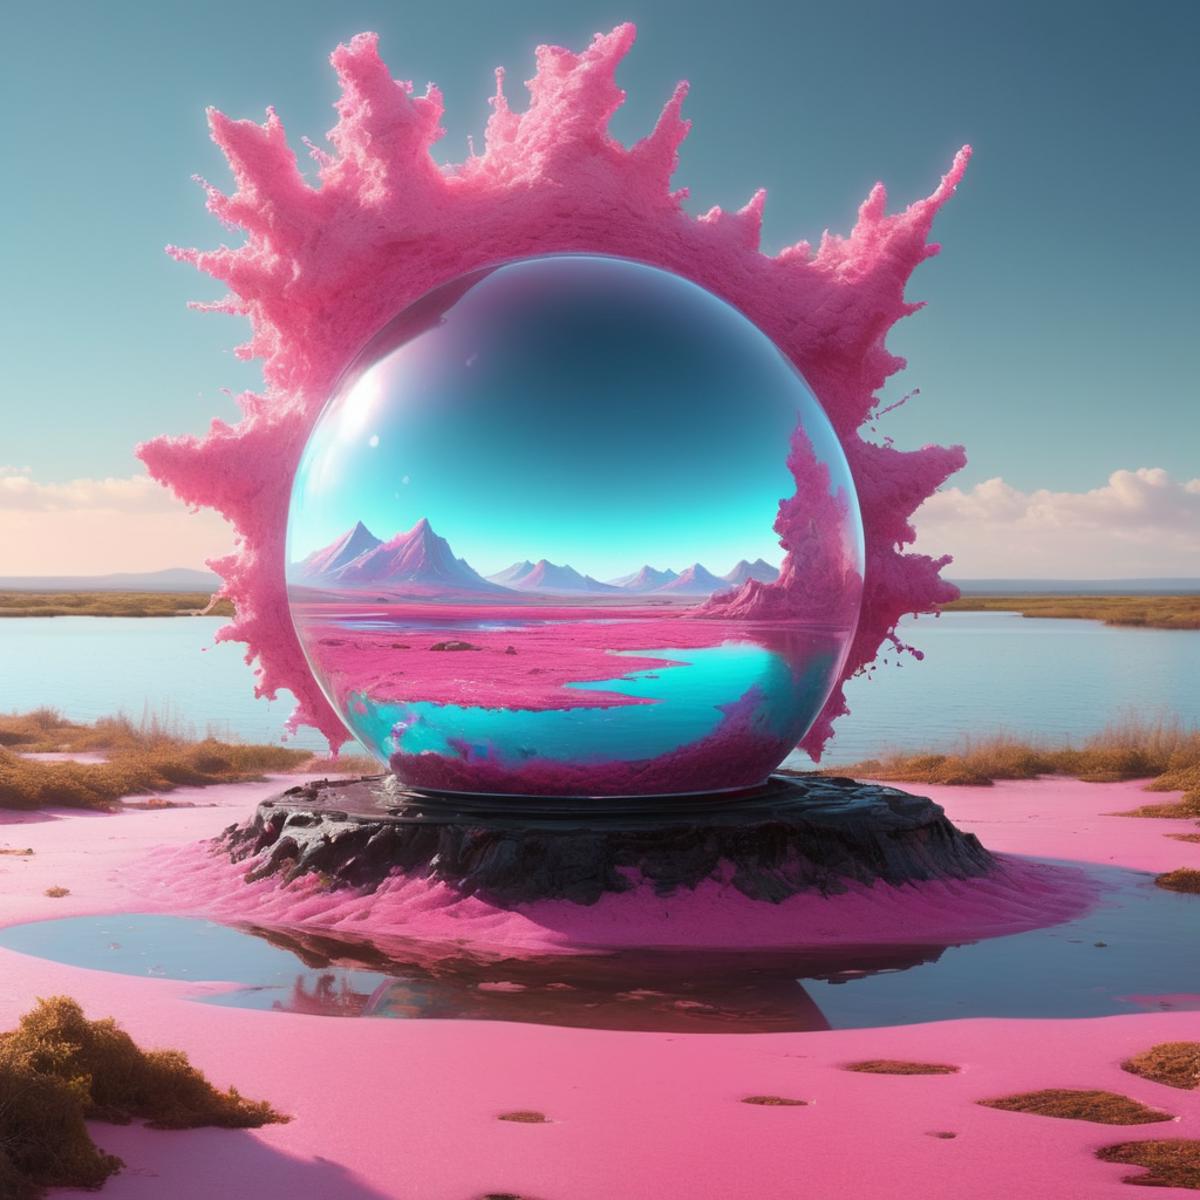 A giant pink sphere with a water scene inside it.